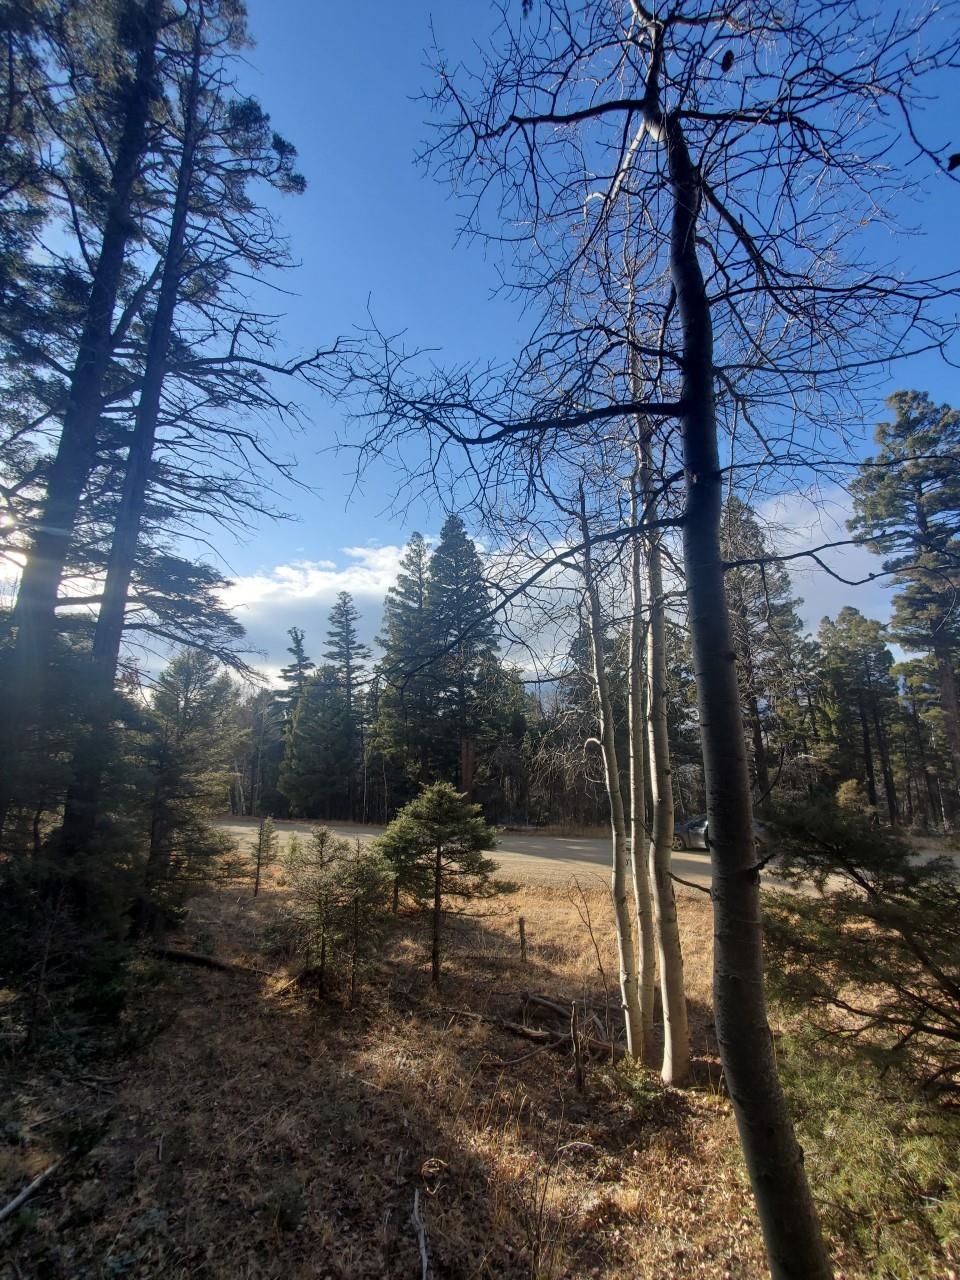 Great lot with tons of potential and excellent location. Build your future mountain paradise on this small piece of serenity.